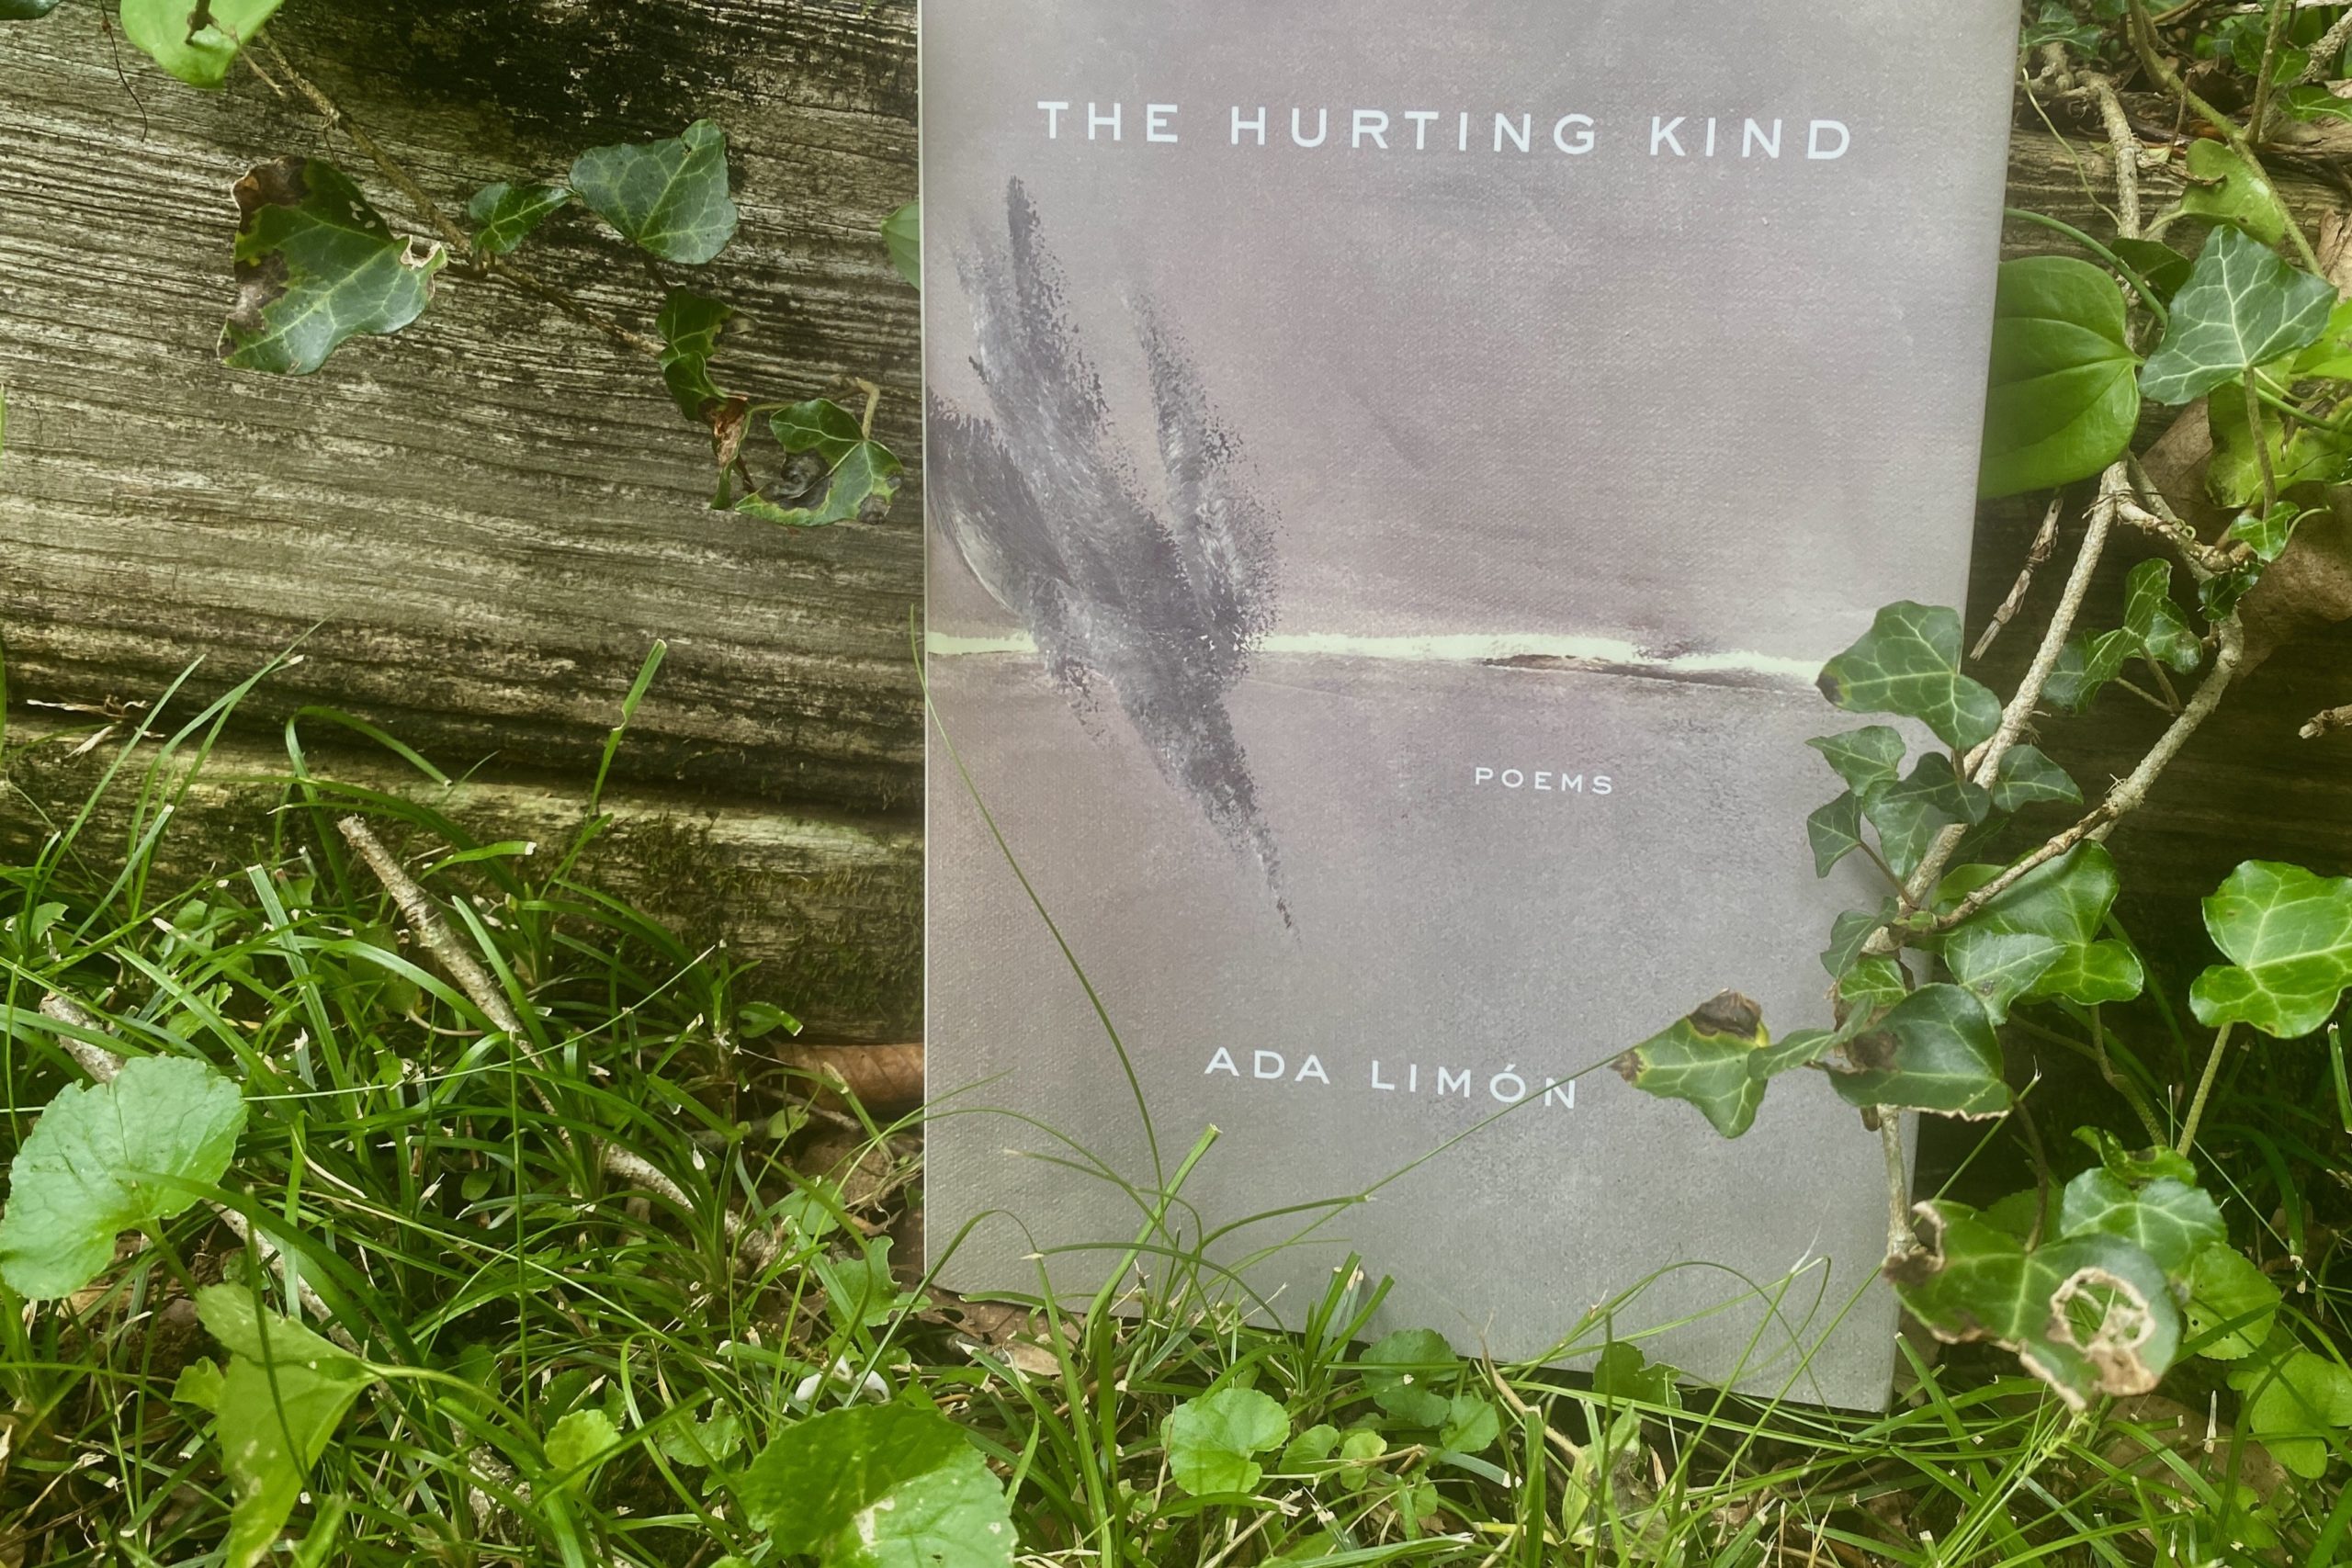 The Hurting Kind by Ada Limón